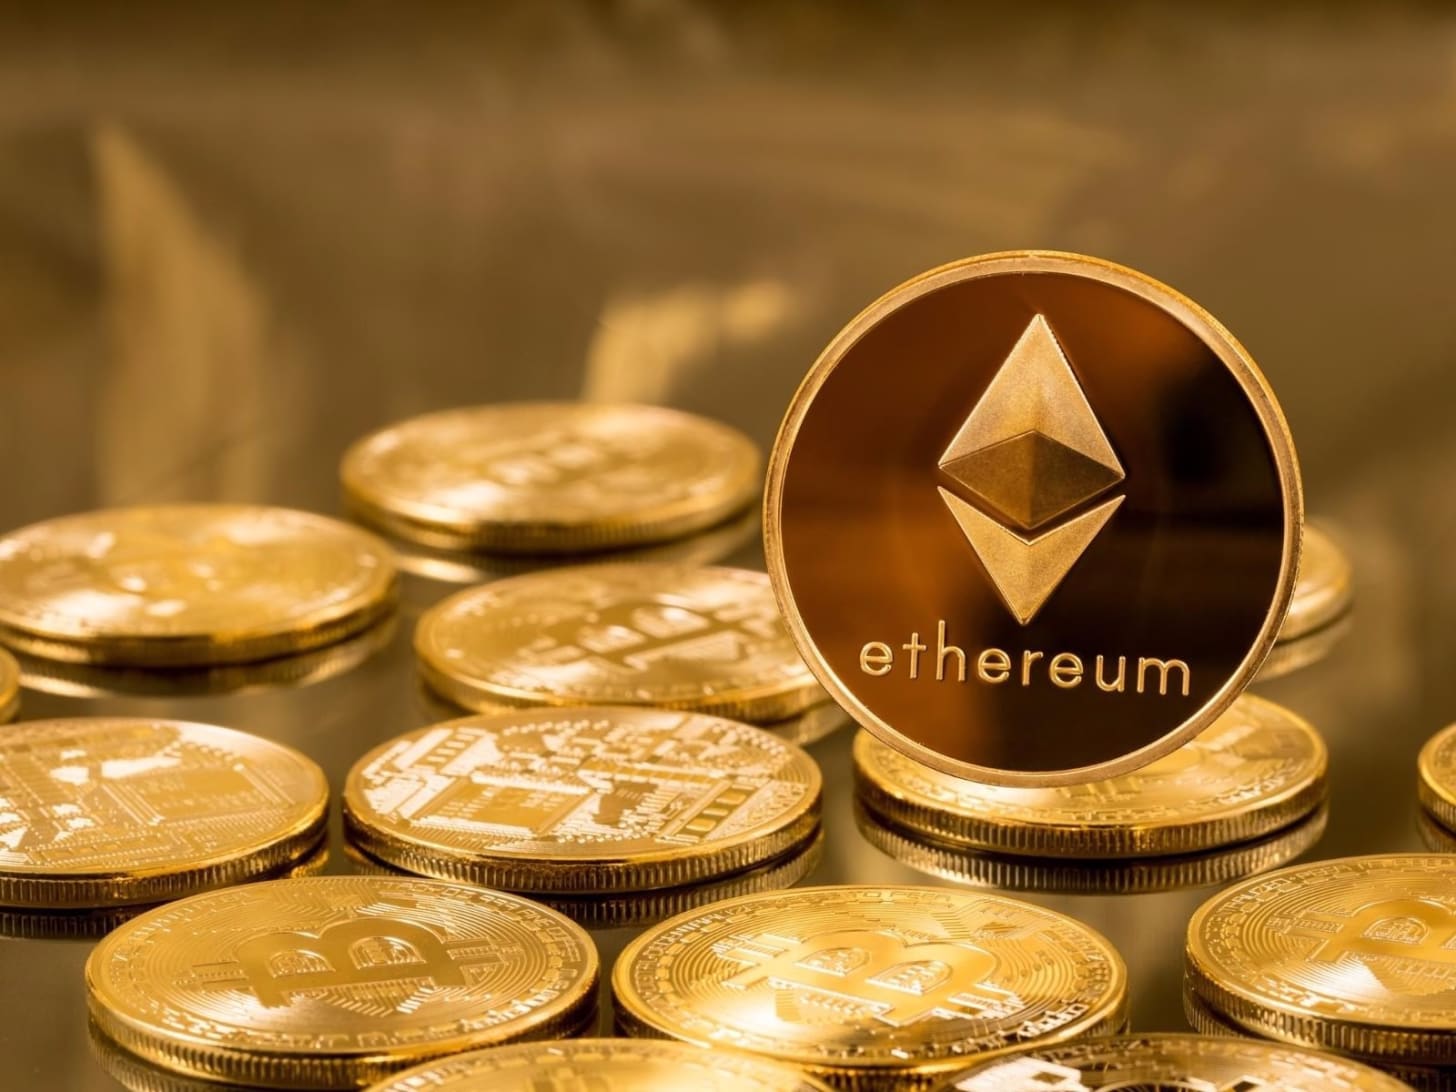 Family Risks Losing Rs 44 Crore in Cryptocurrency Ethereum After House Fire